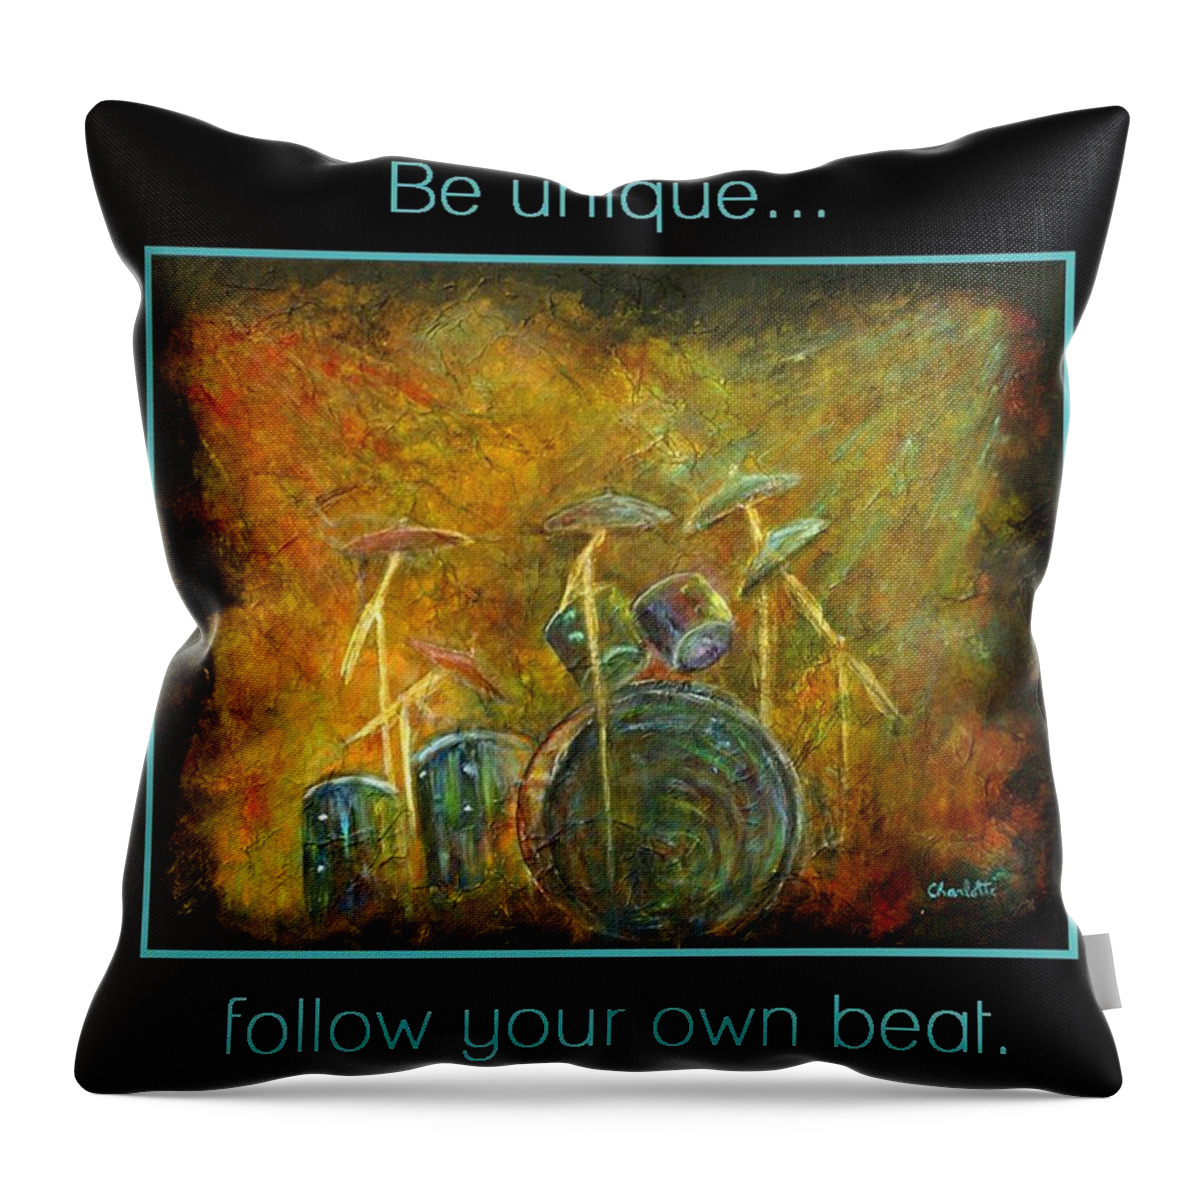 Drums Throw Pillow featuring the painting Be Unique...Follow Your Own Beat by The Art With A Heart By Charlotte Phillips